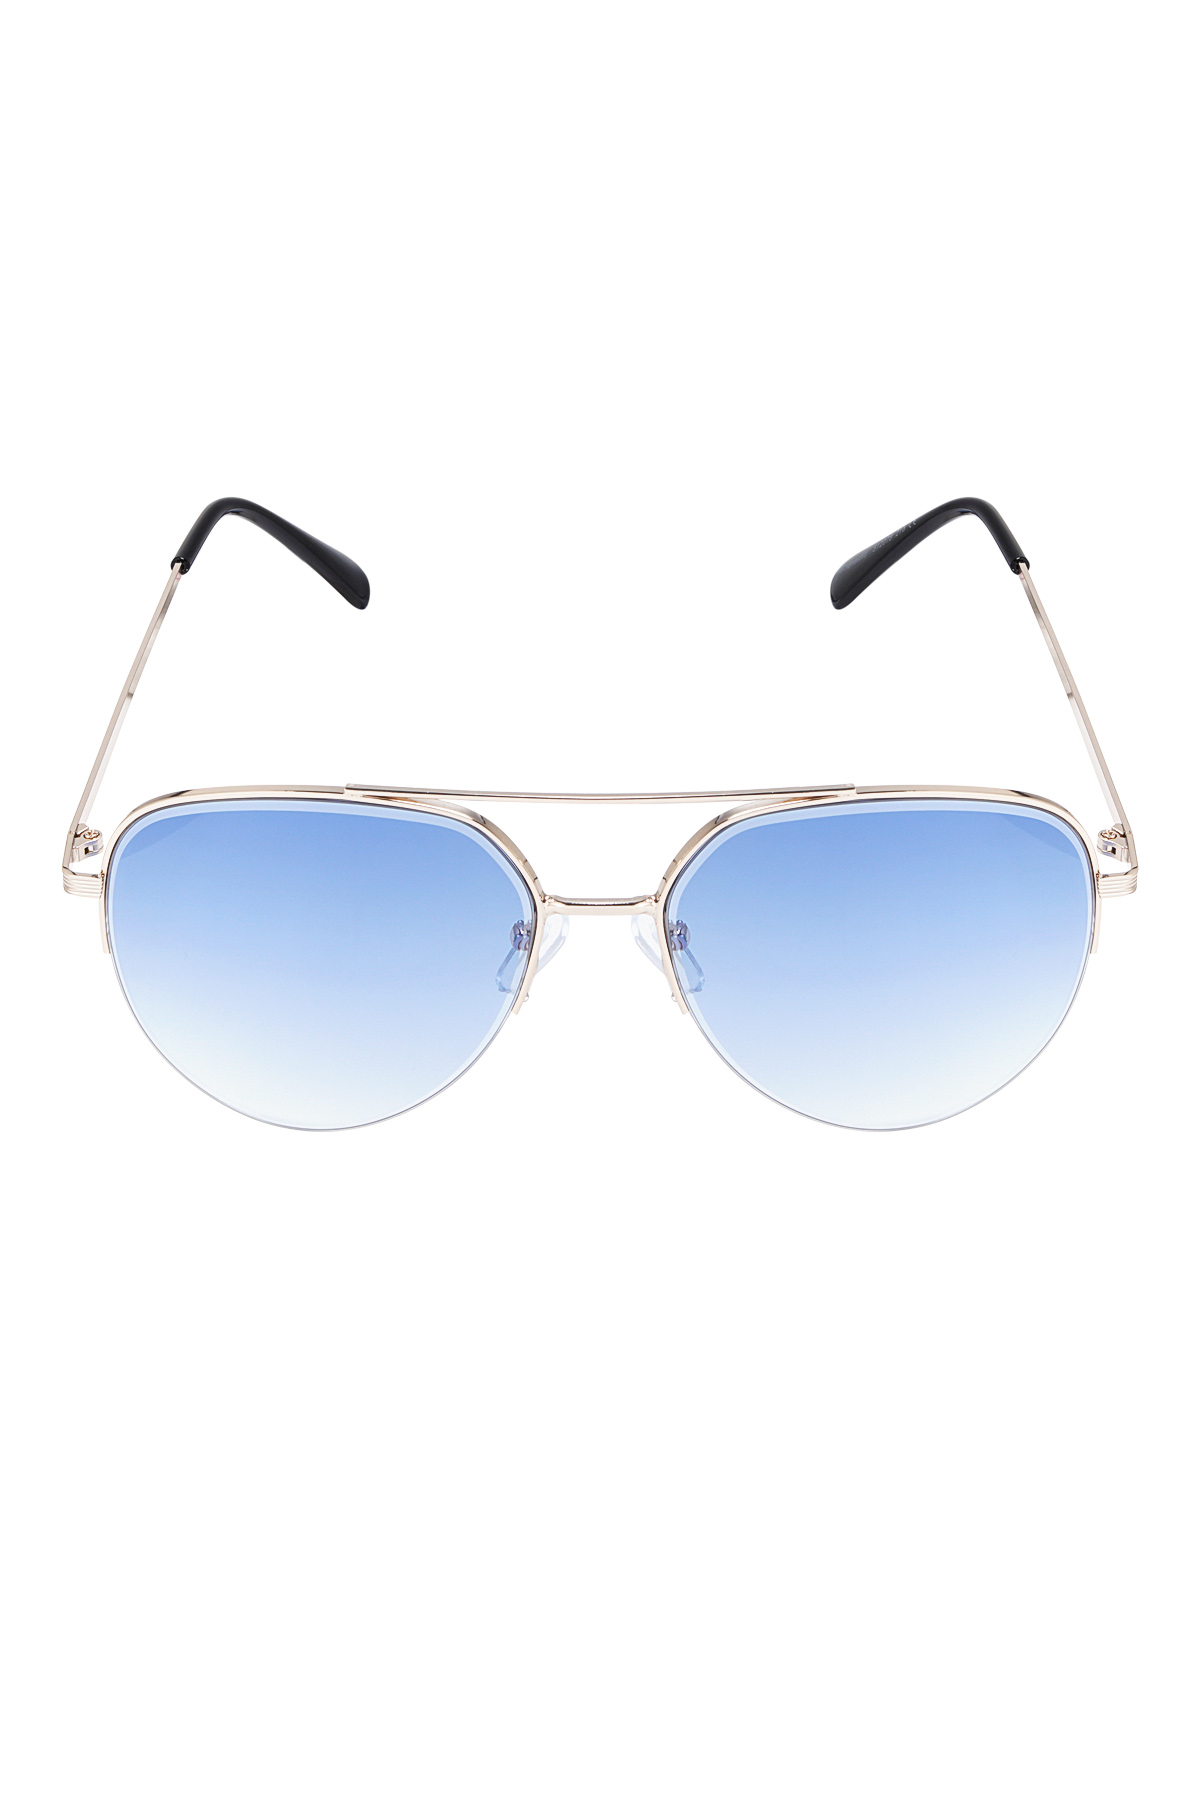 Aviator style sunglasses - blue gold h5 Picture5